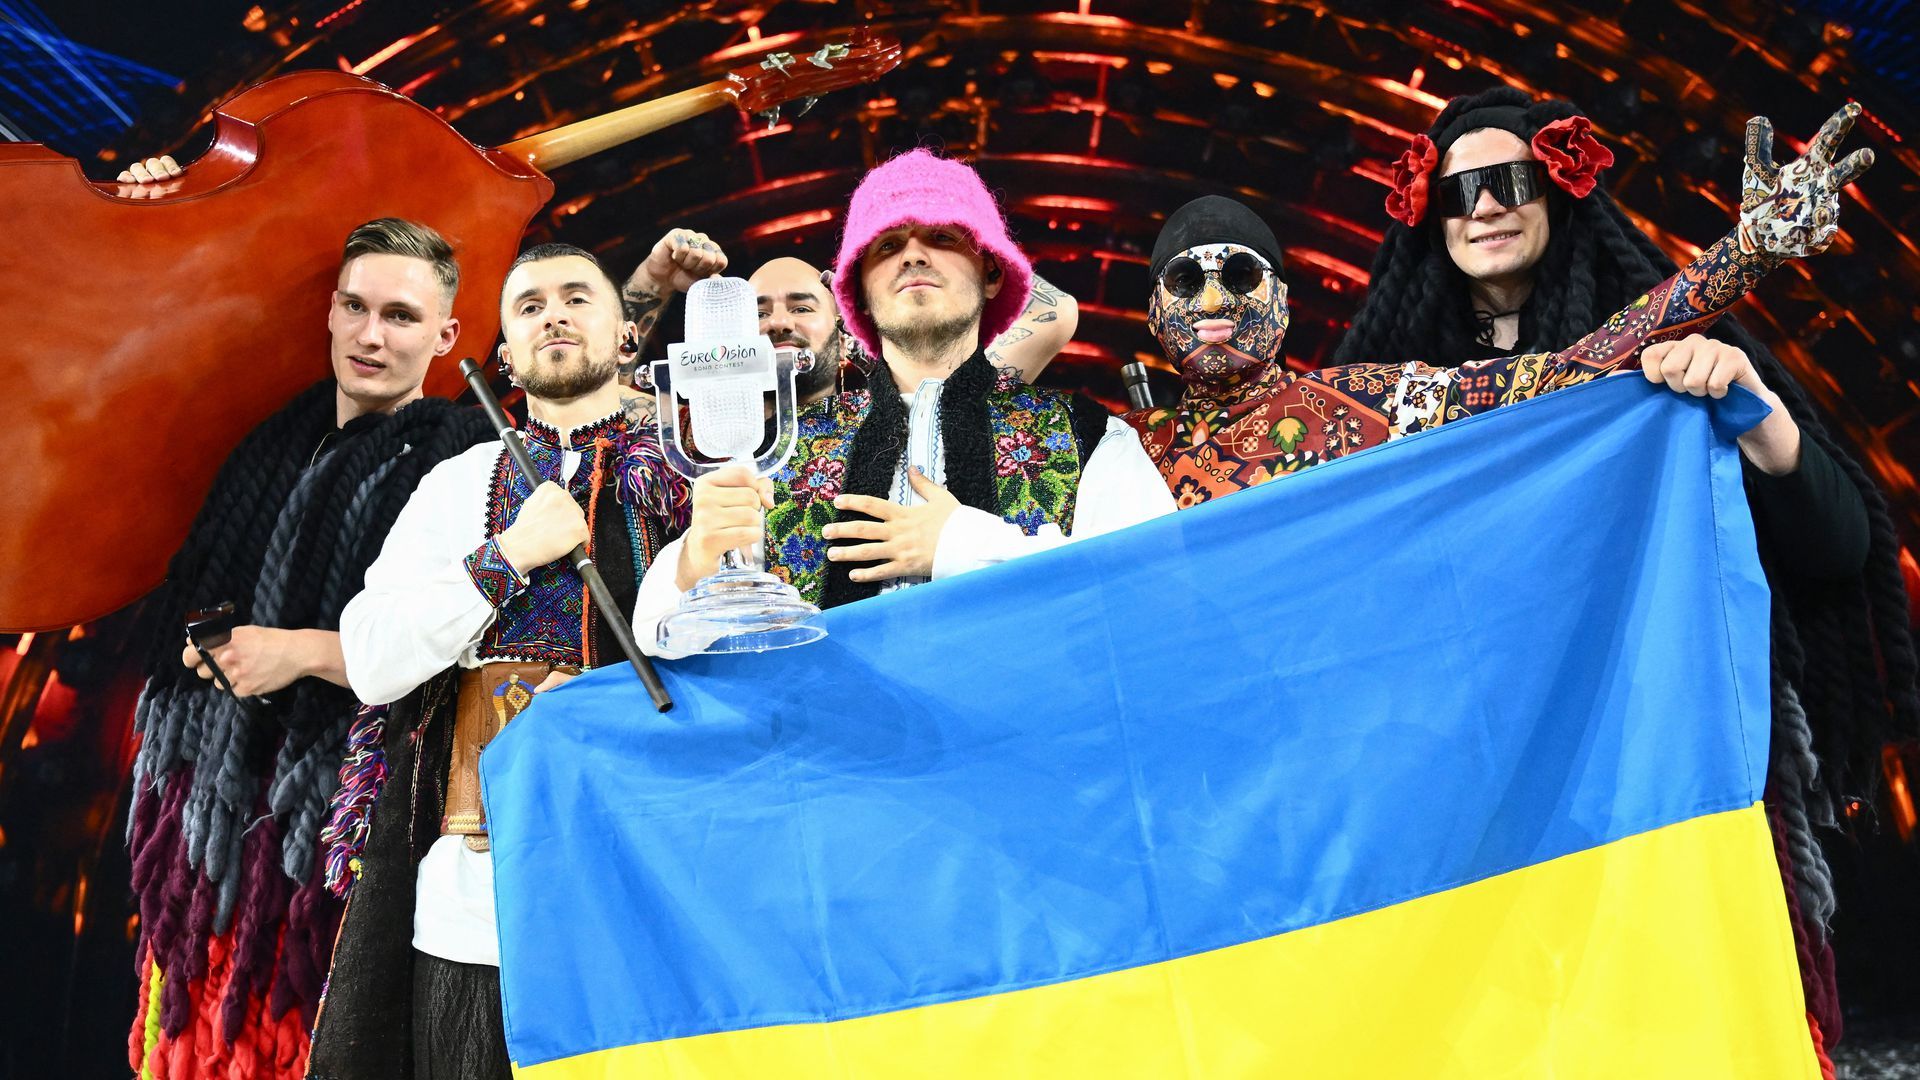 The Kalush Orchestra from Ukraine rejoices over winning the Eurovision Song Contest. Photo: Jens Büttner/picture alliance via Getty Images